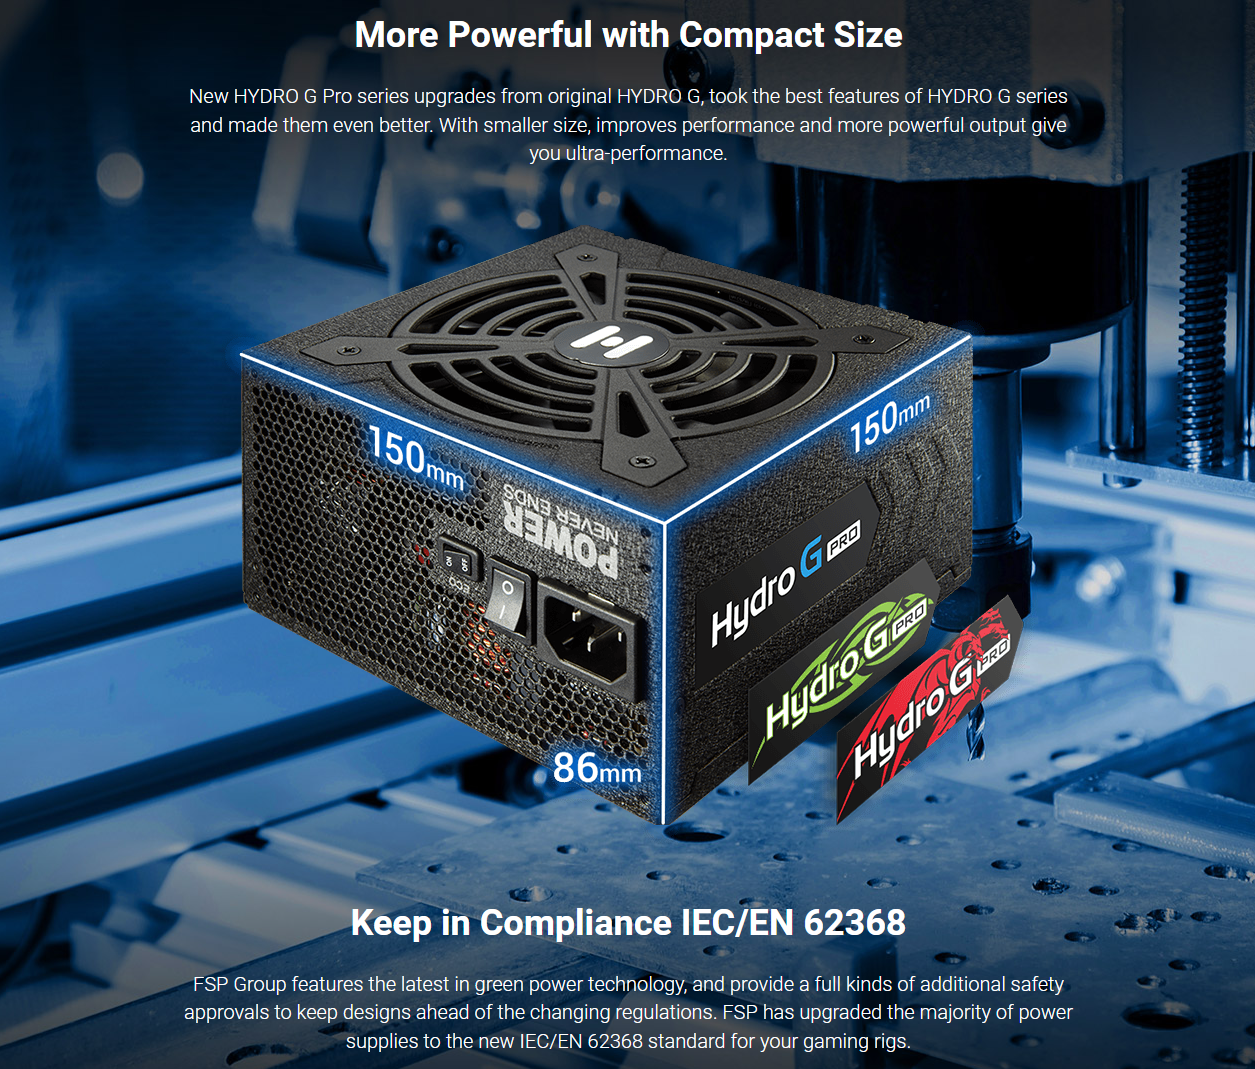 Hydro G PRO ATX3.0 PCIe5.0 1000W Gen5 Fully Modular 80+ Gold Power Supply with ATX 12V CPU power connector for RTX 40 series cards (RTX 4090 4080)